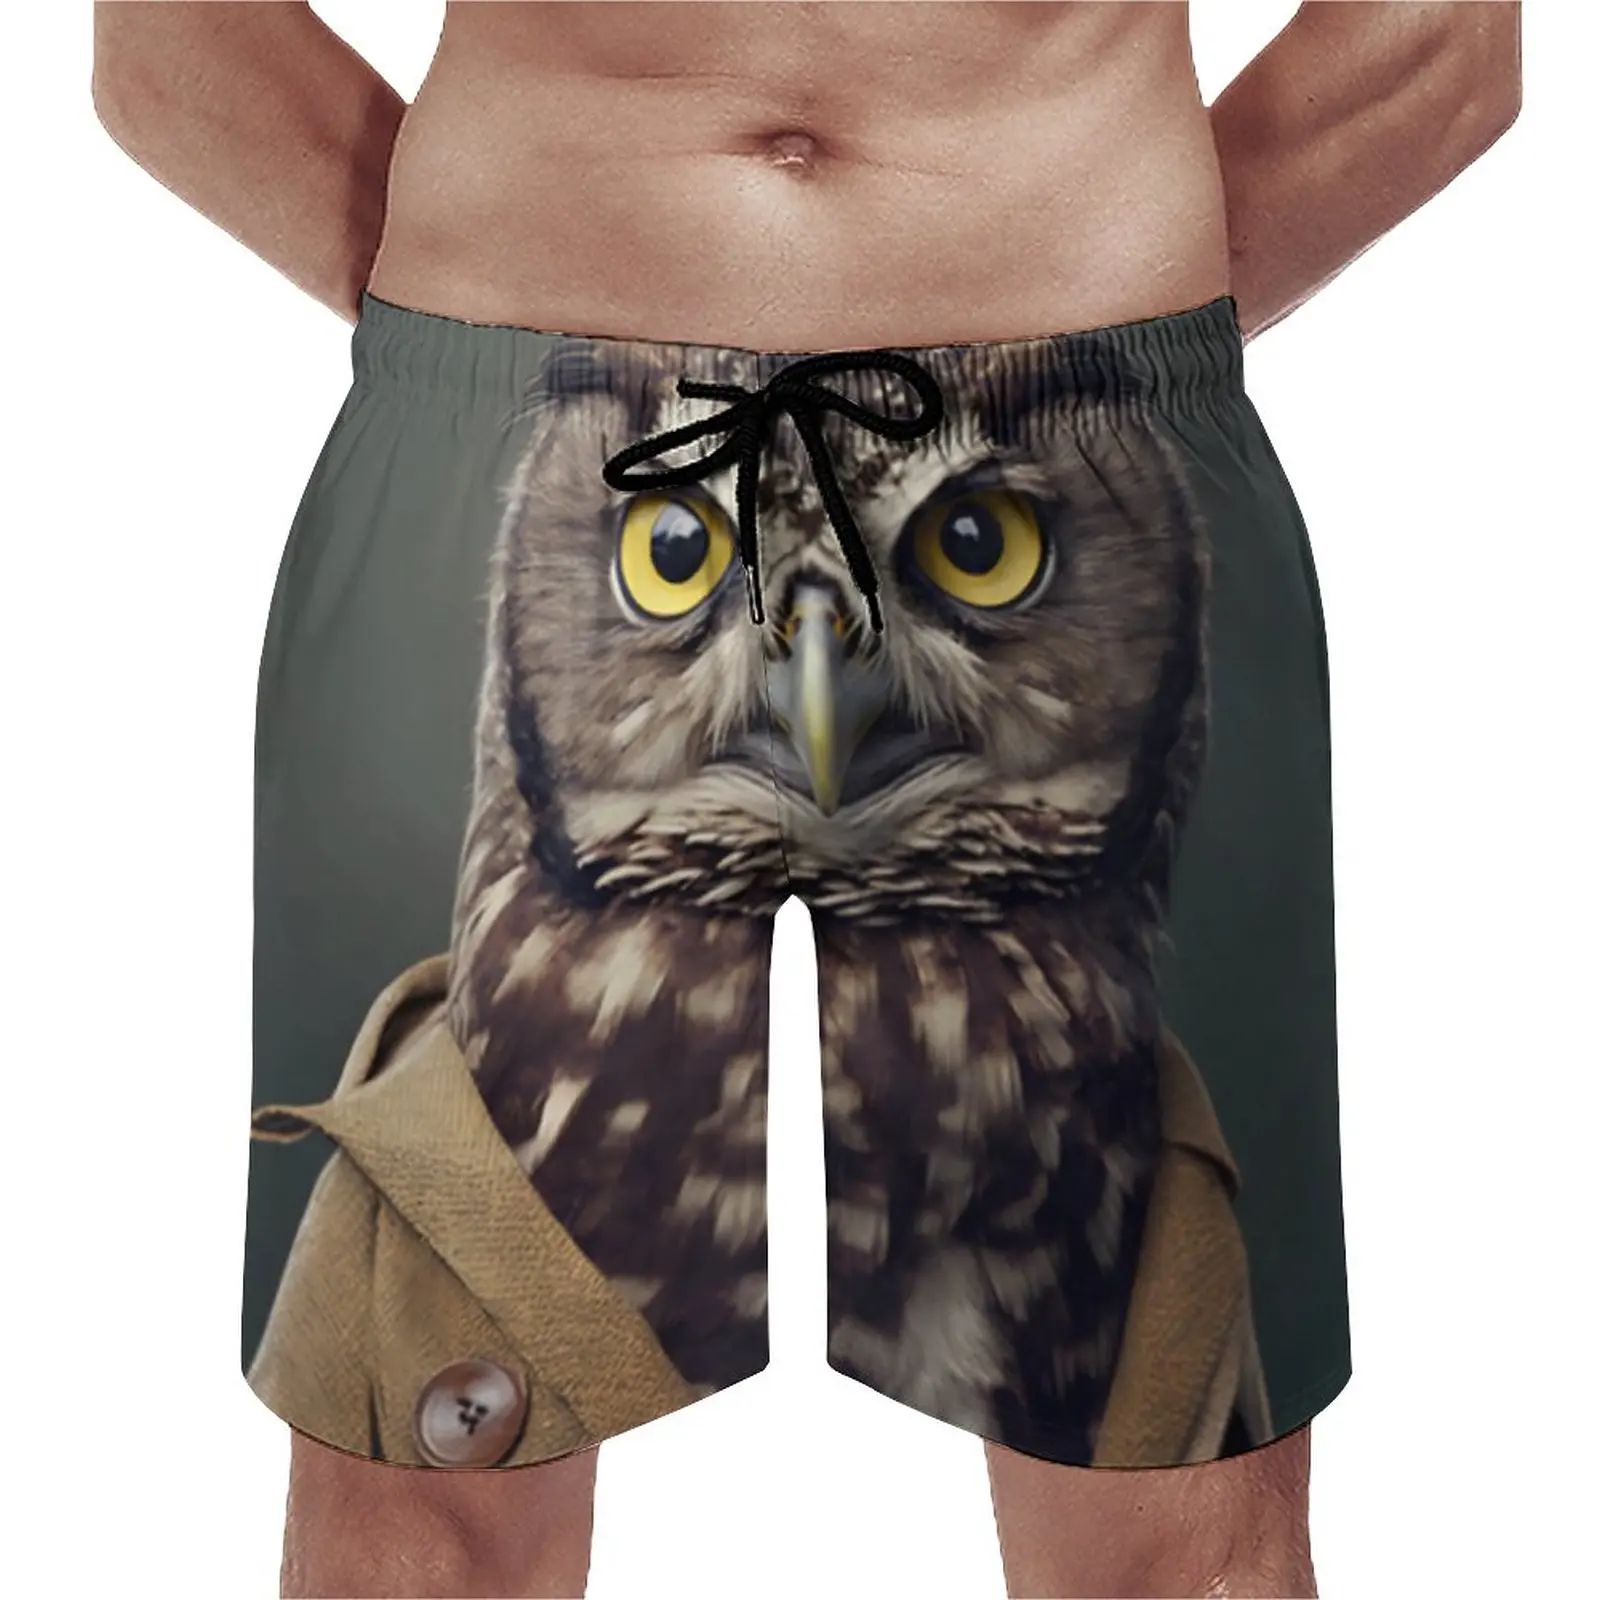 

Summer Board Shorts Owl Running Surf Dapper Clothing Design Board Short Pants Cute Quick Drying Swimming Trunks Plus Size